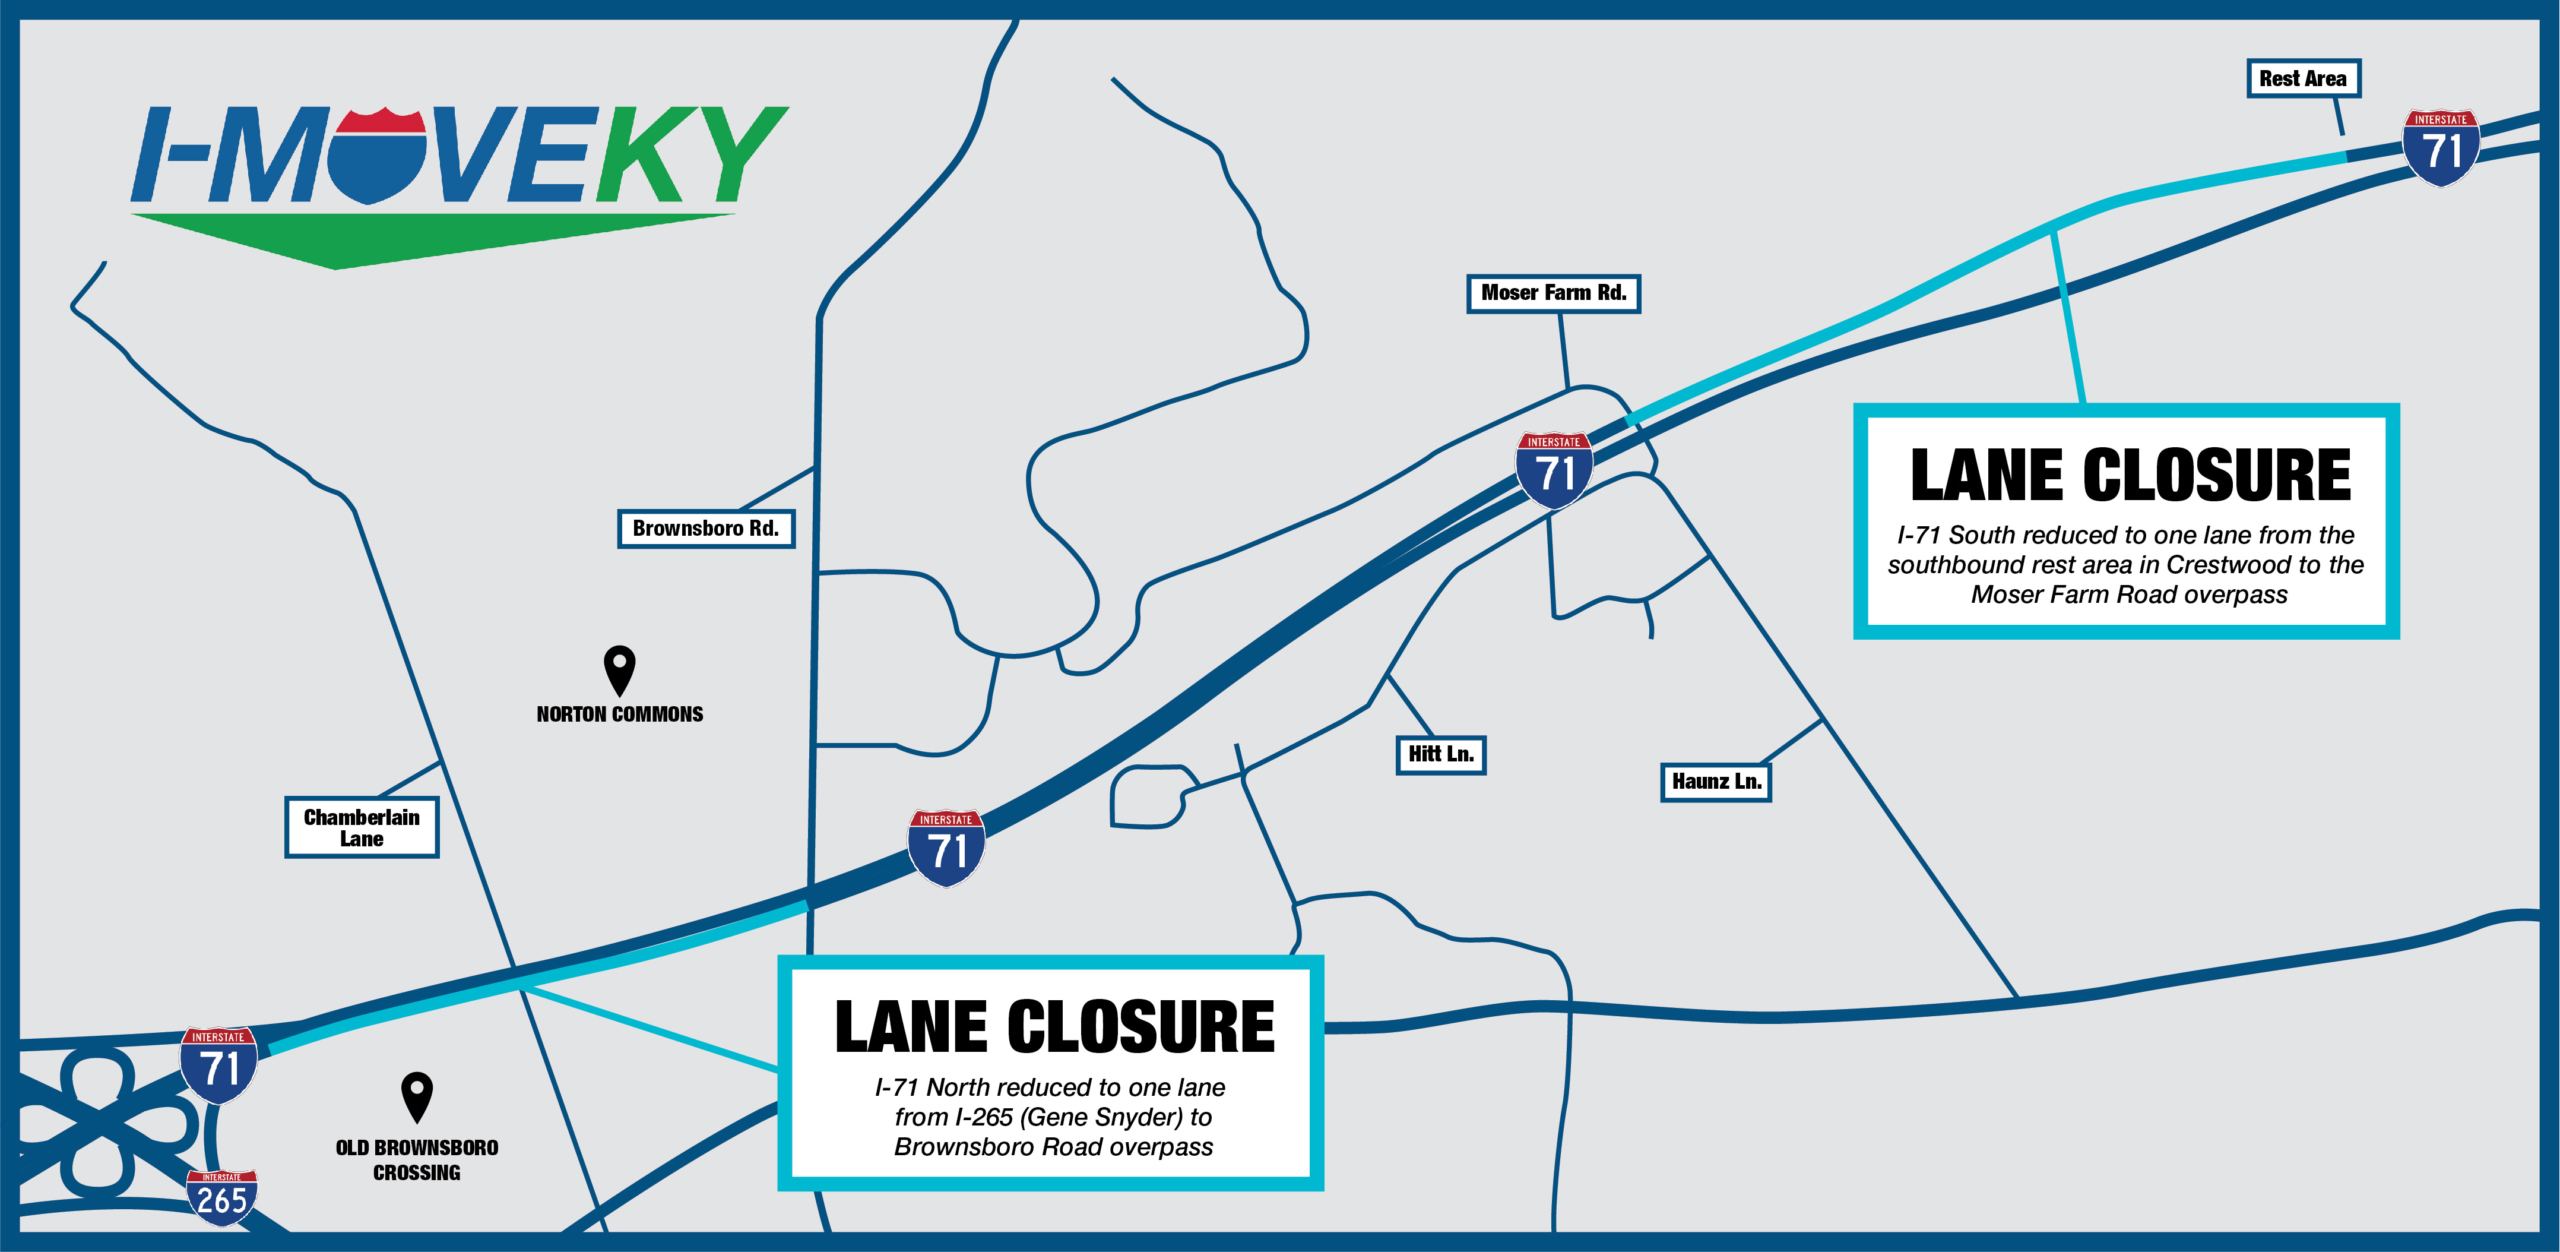 A map of I-71 showing the anticipated lane closures. The map is gray with blue lines for the roads. The closures are marked in light blue.